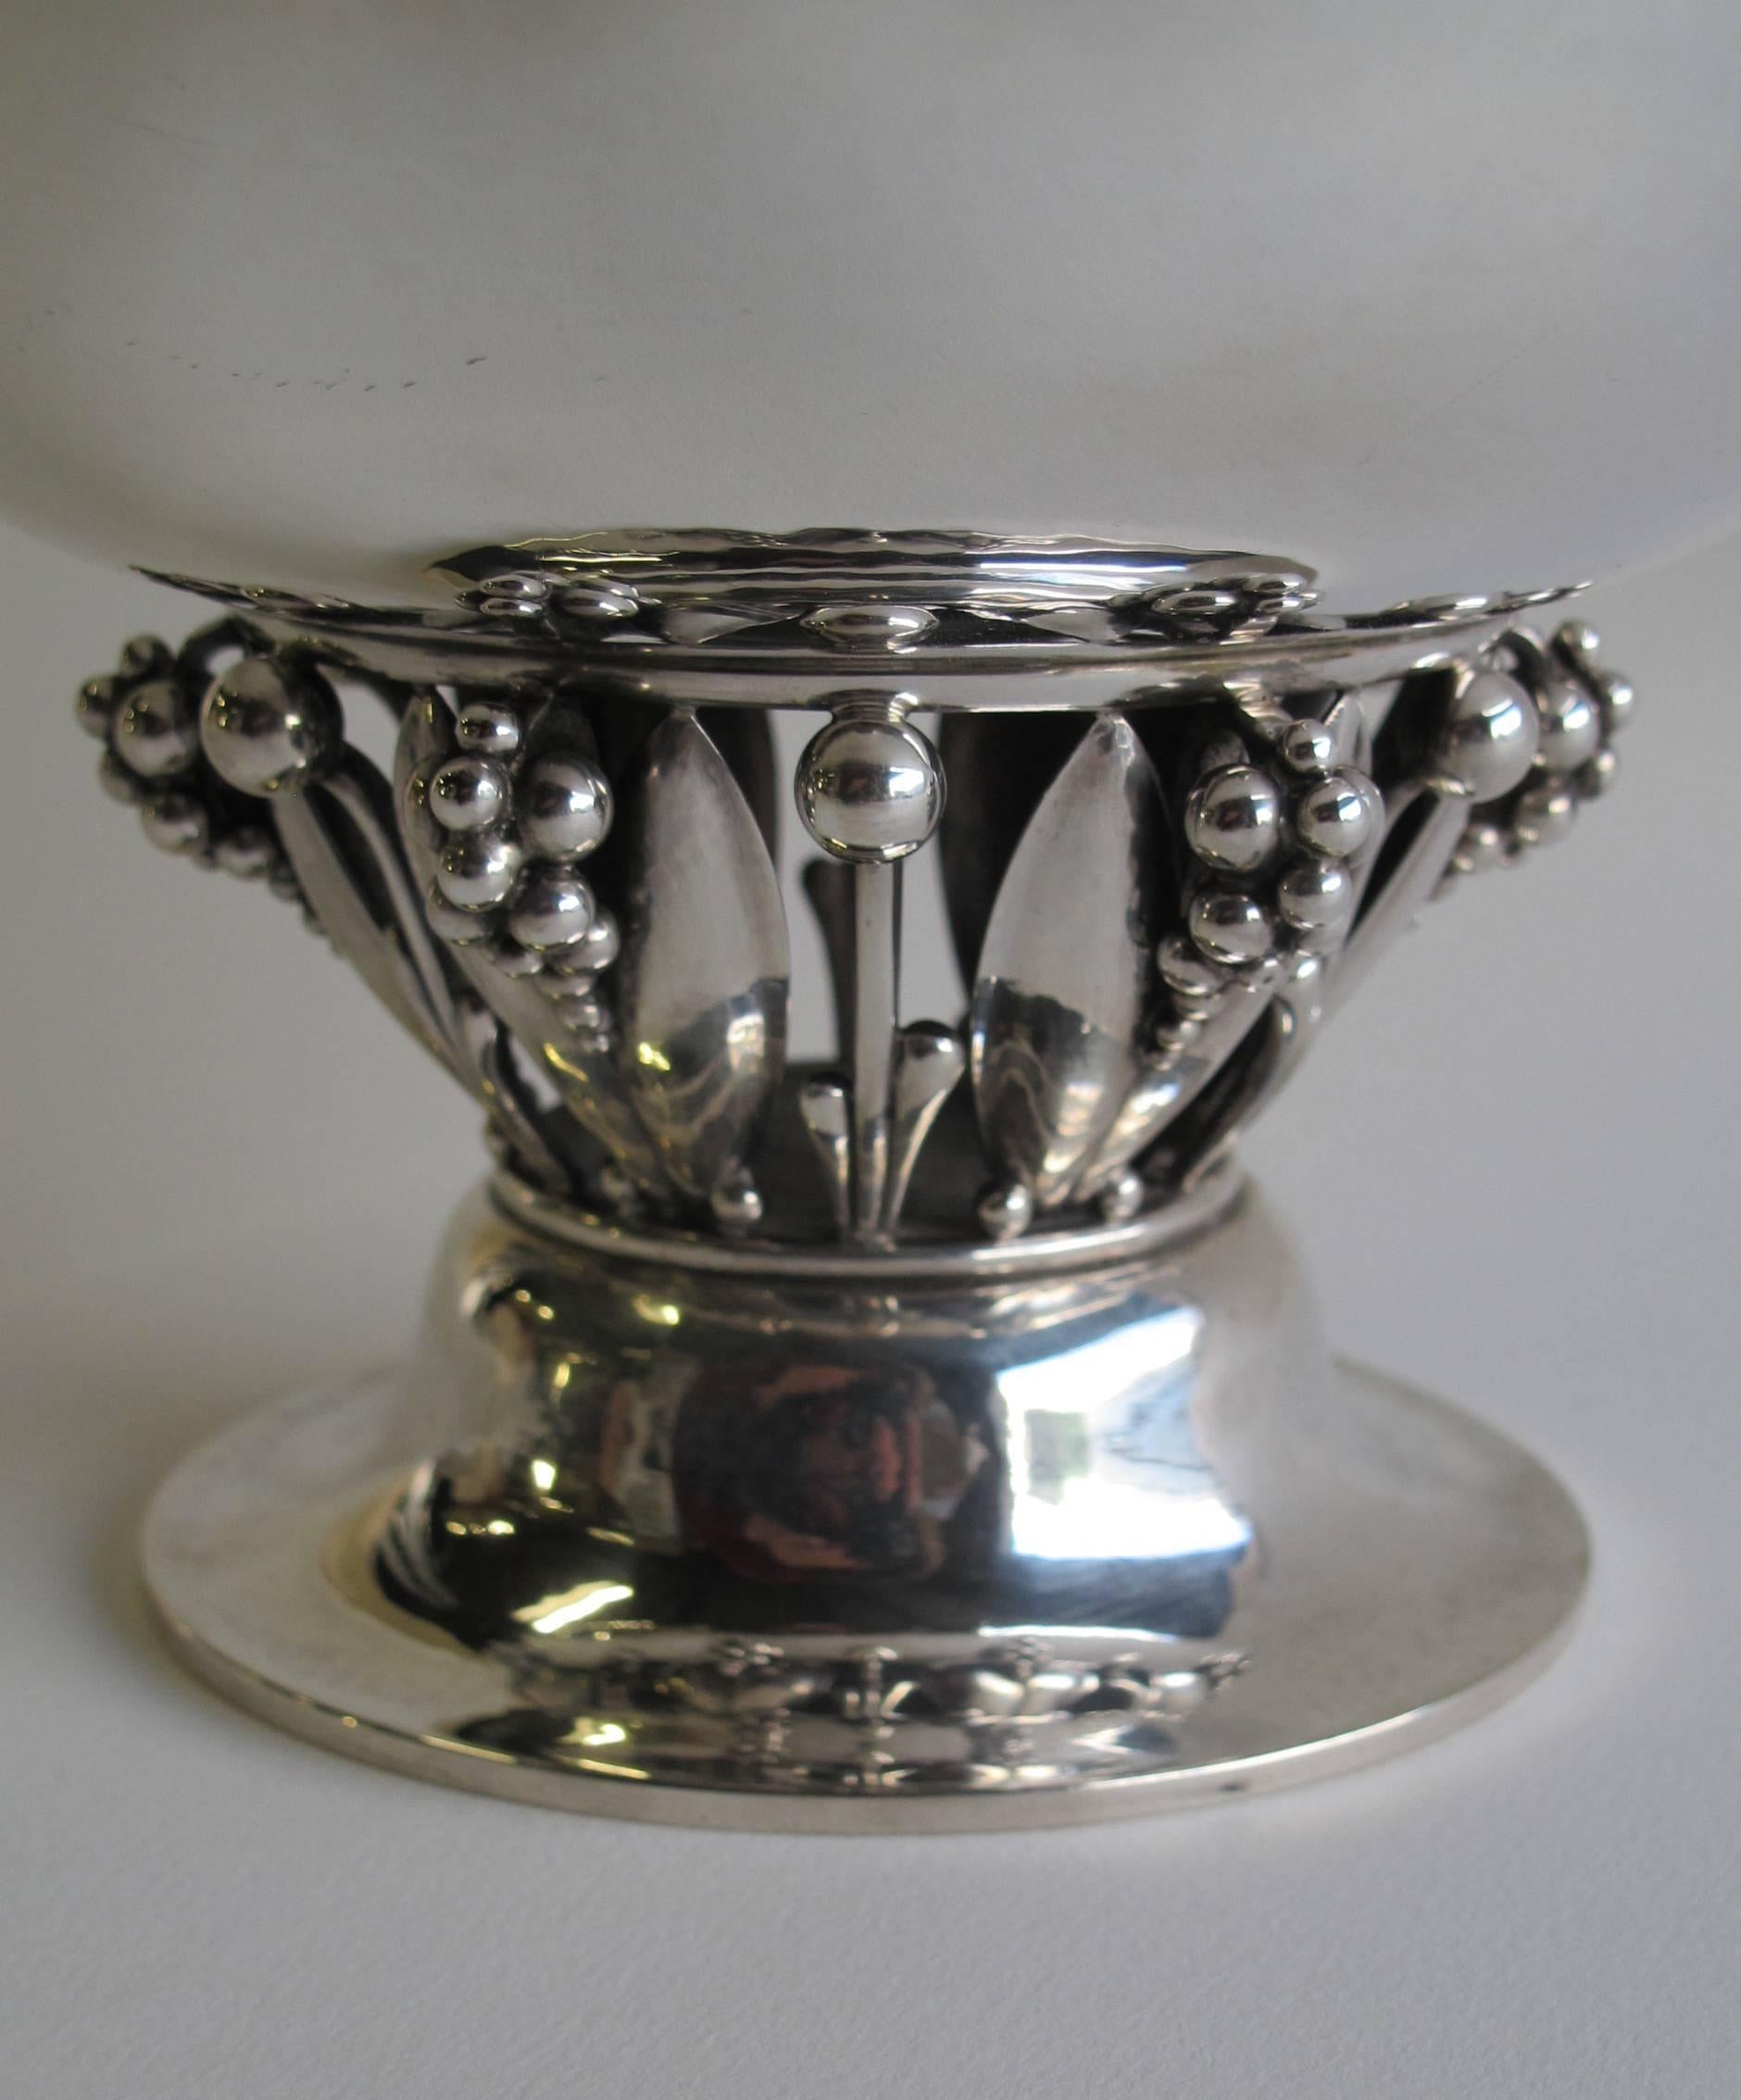 Outstanding hammered sterling silver centerpiece designed by Georg Jensen in 1916. The bowl rests on an openwork stem with leaves an grapes and a circular foot. The number of this design is 197a. The piece is executed between 1945-1951.

The